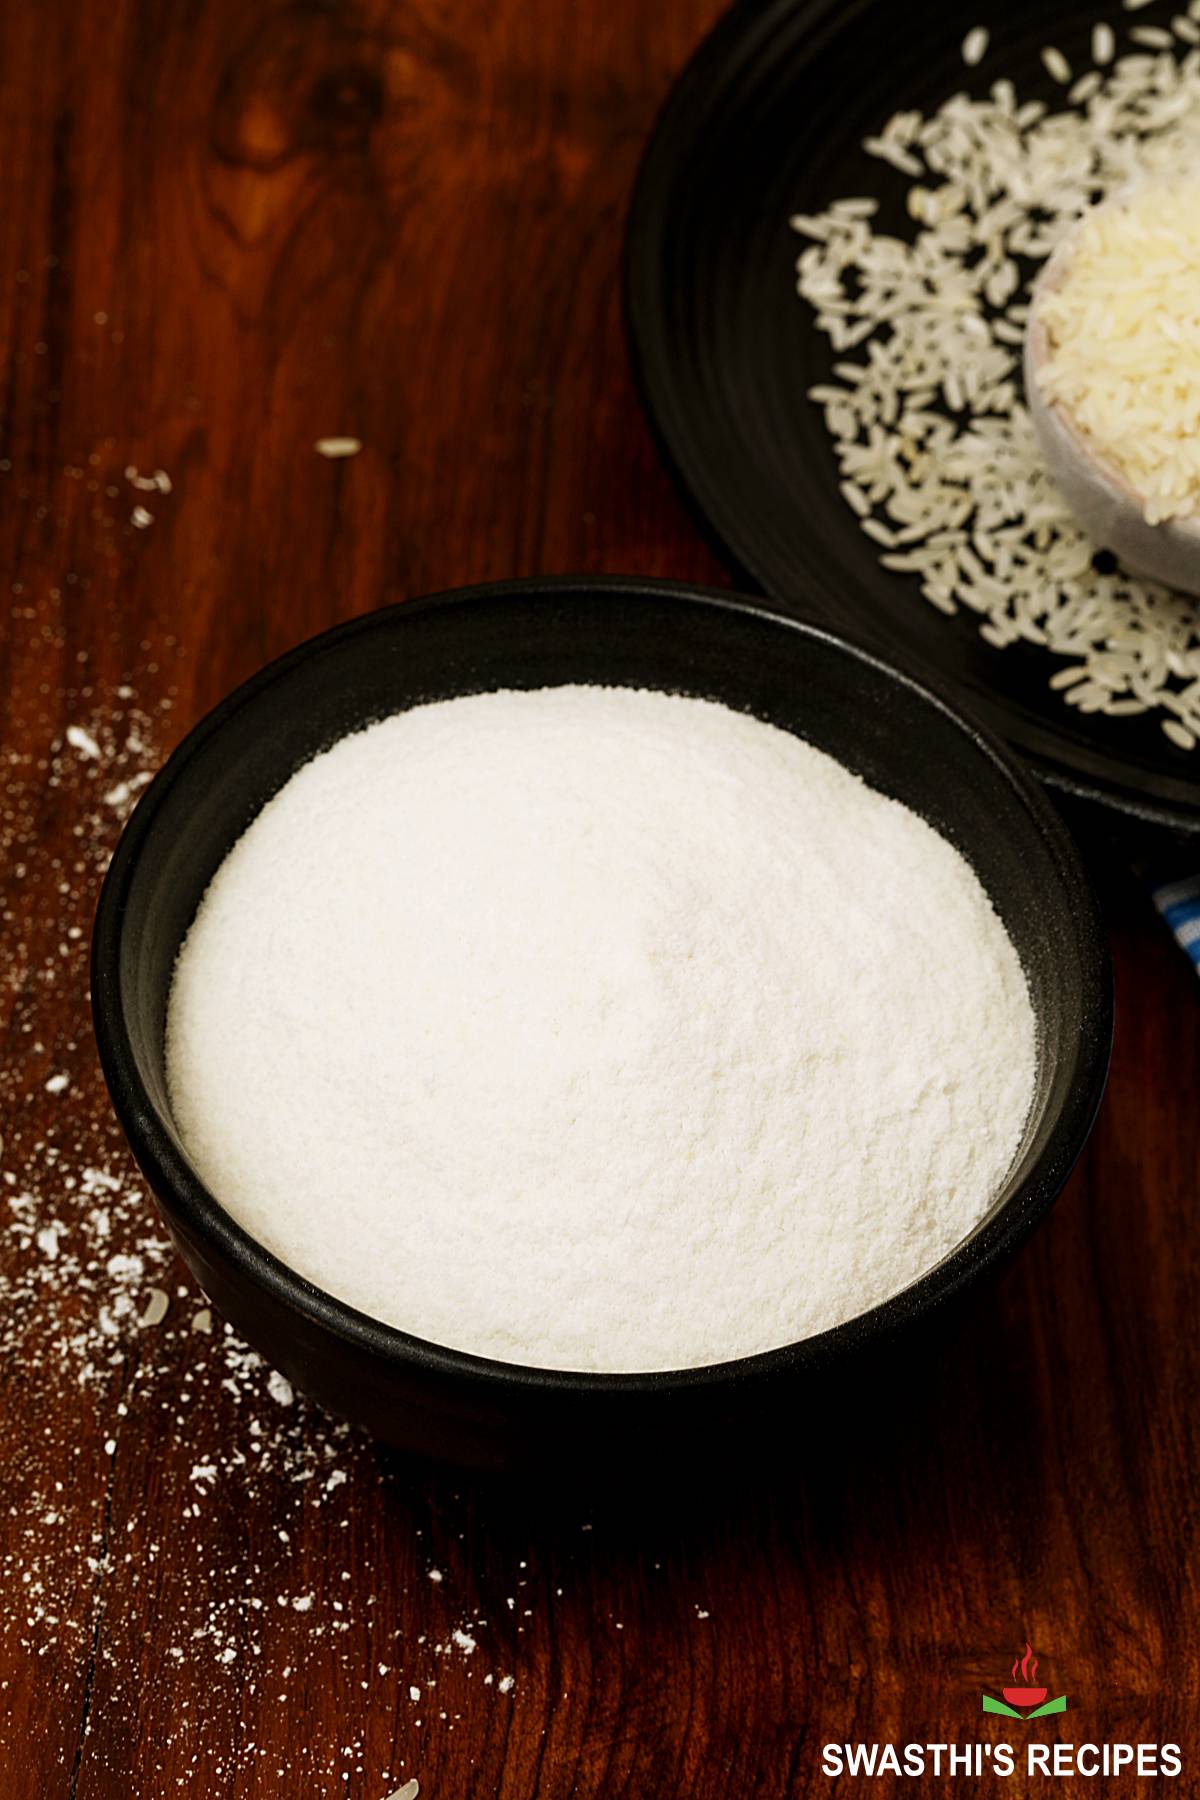 How to Make Rice Flour at Home